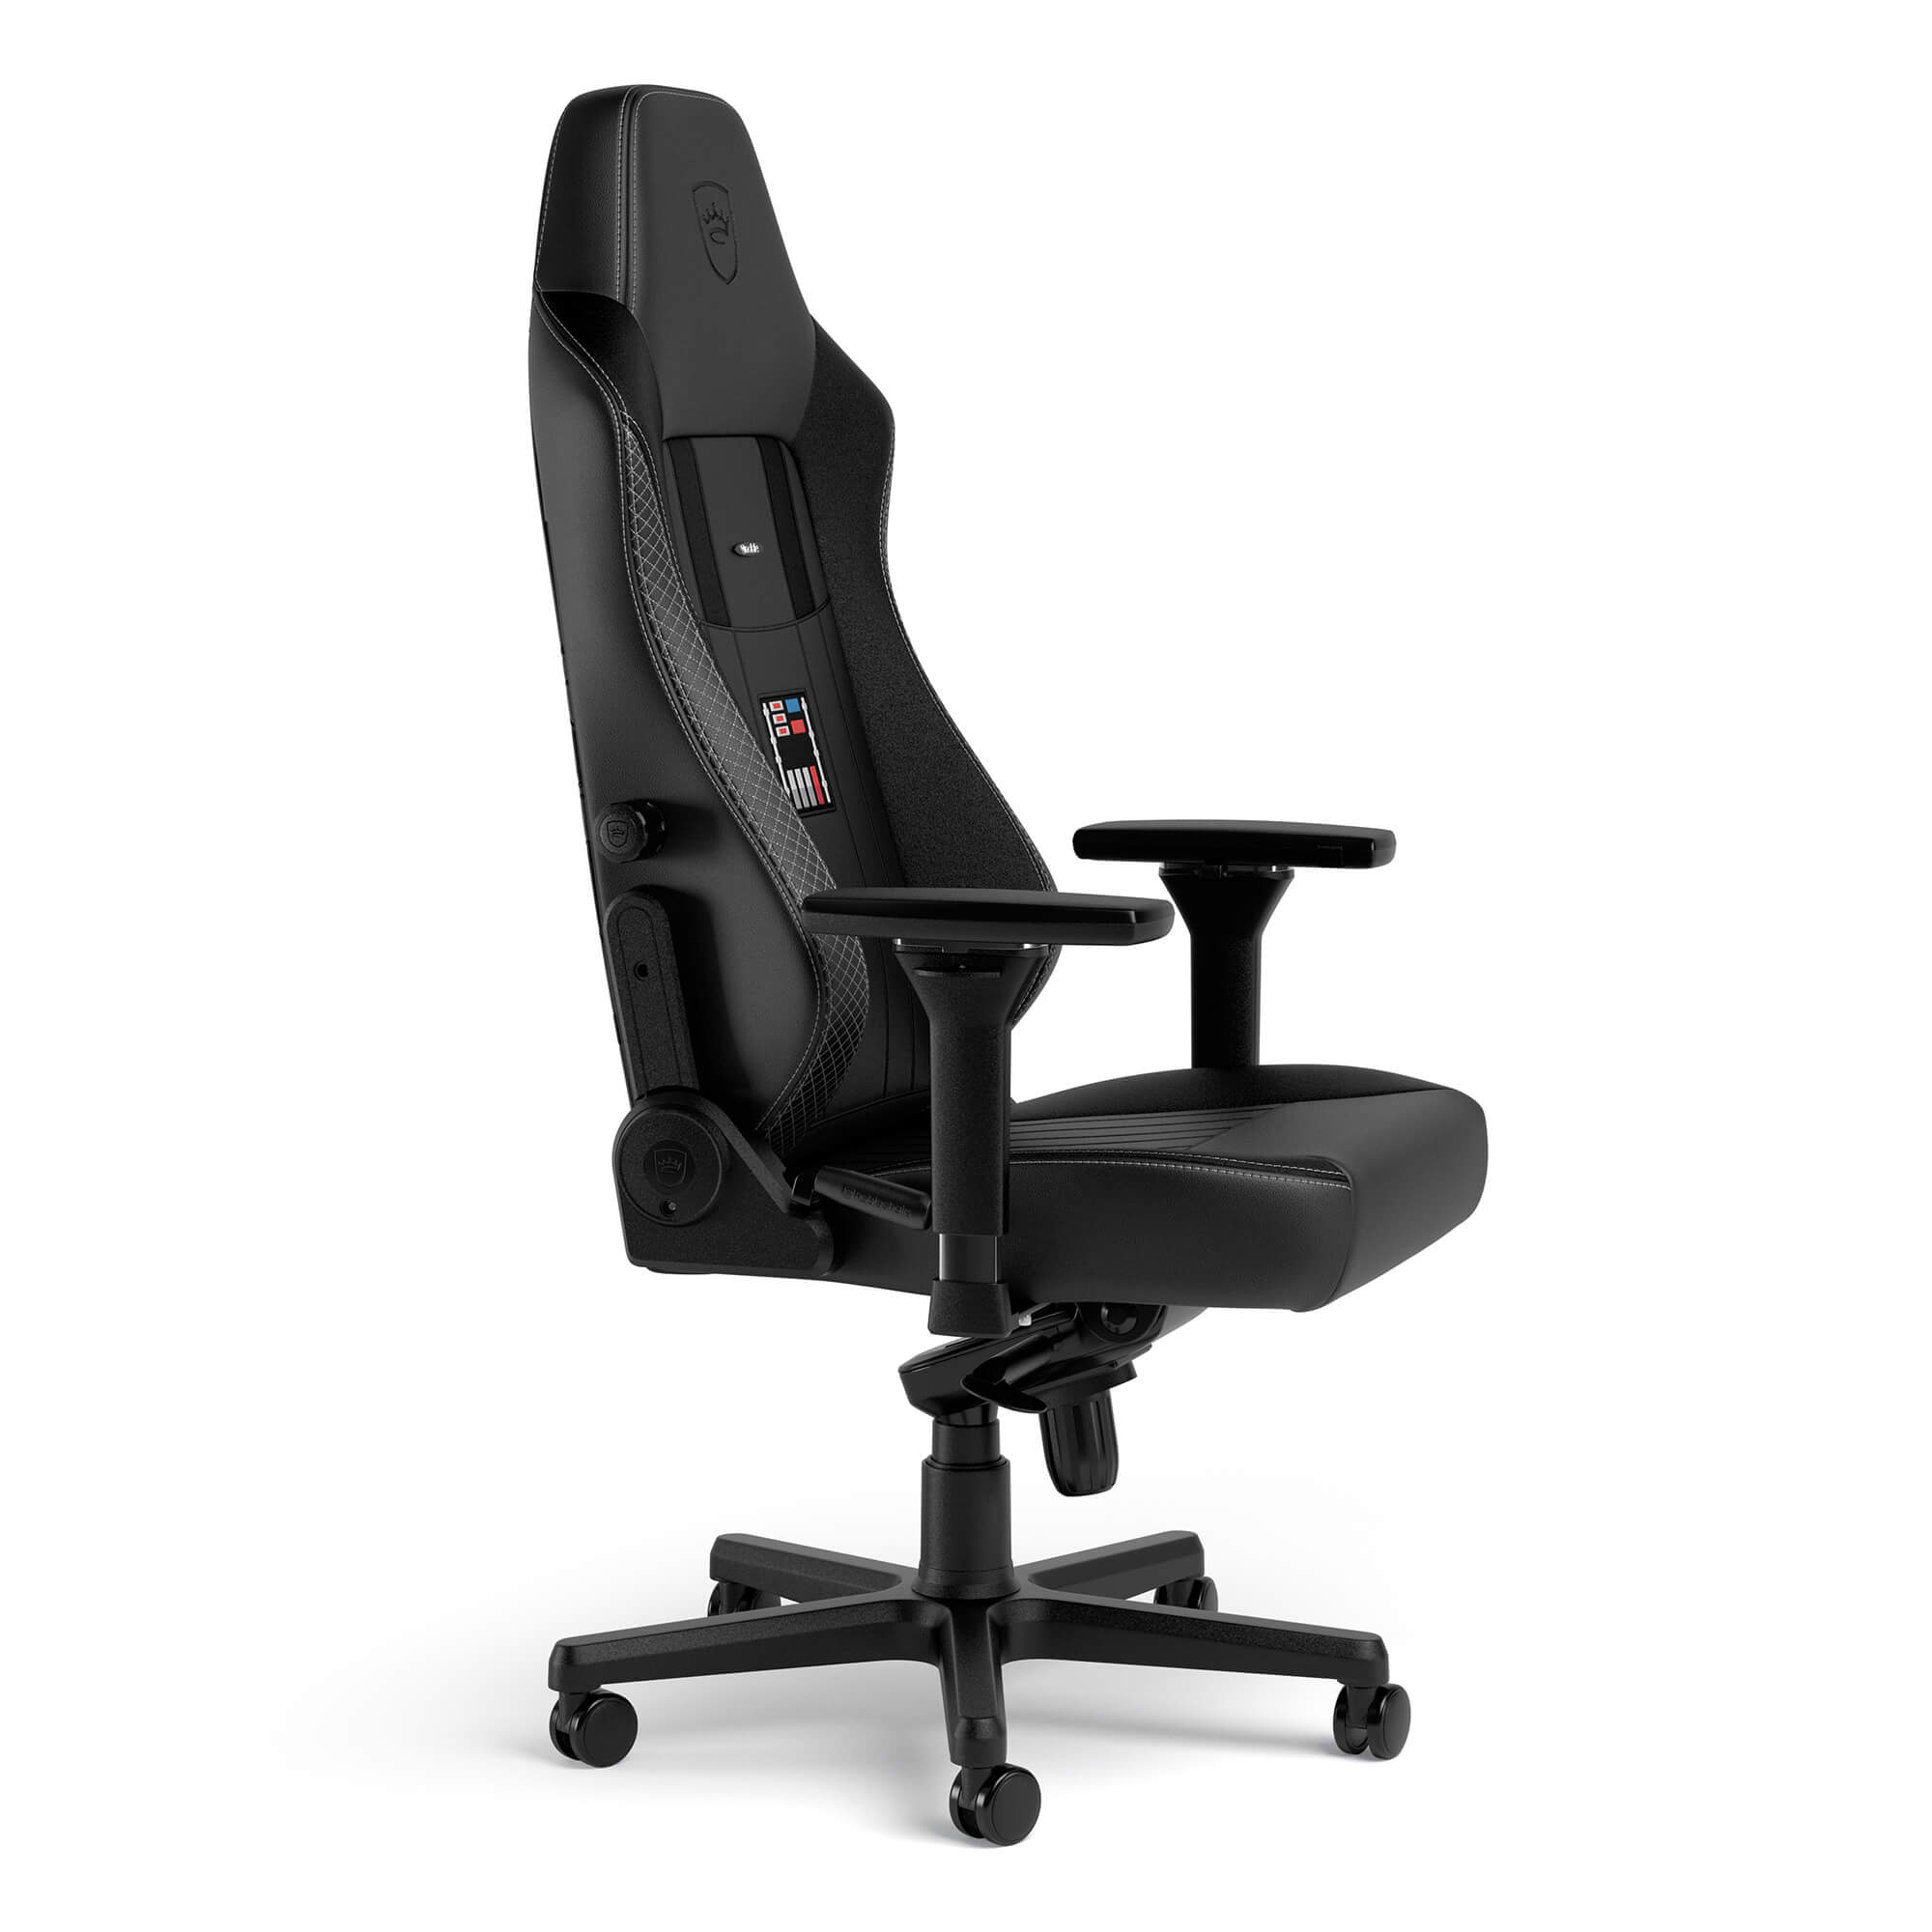 noblechairs - noblechairs HERO Gaming Chair Darth Vader Edition